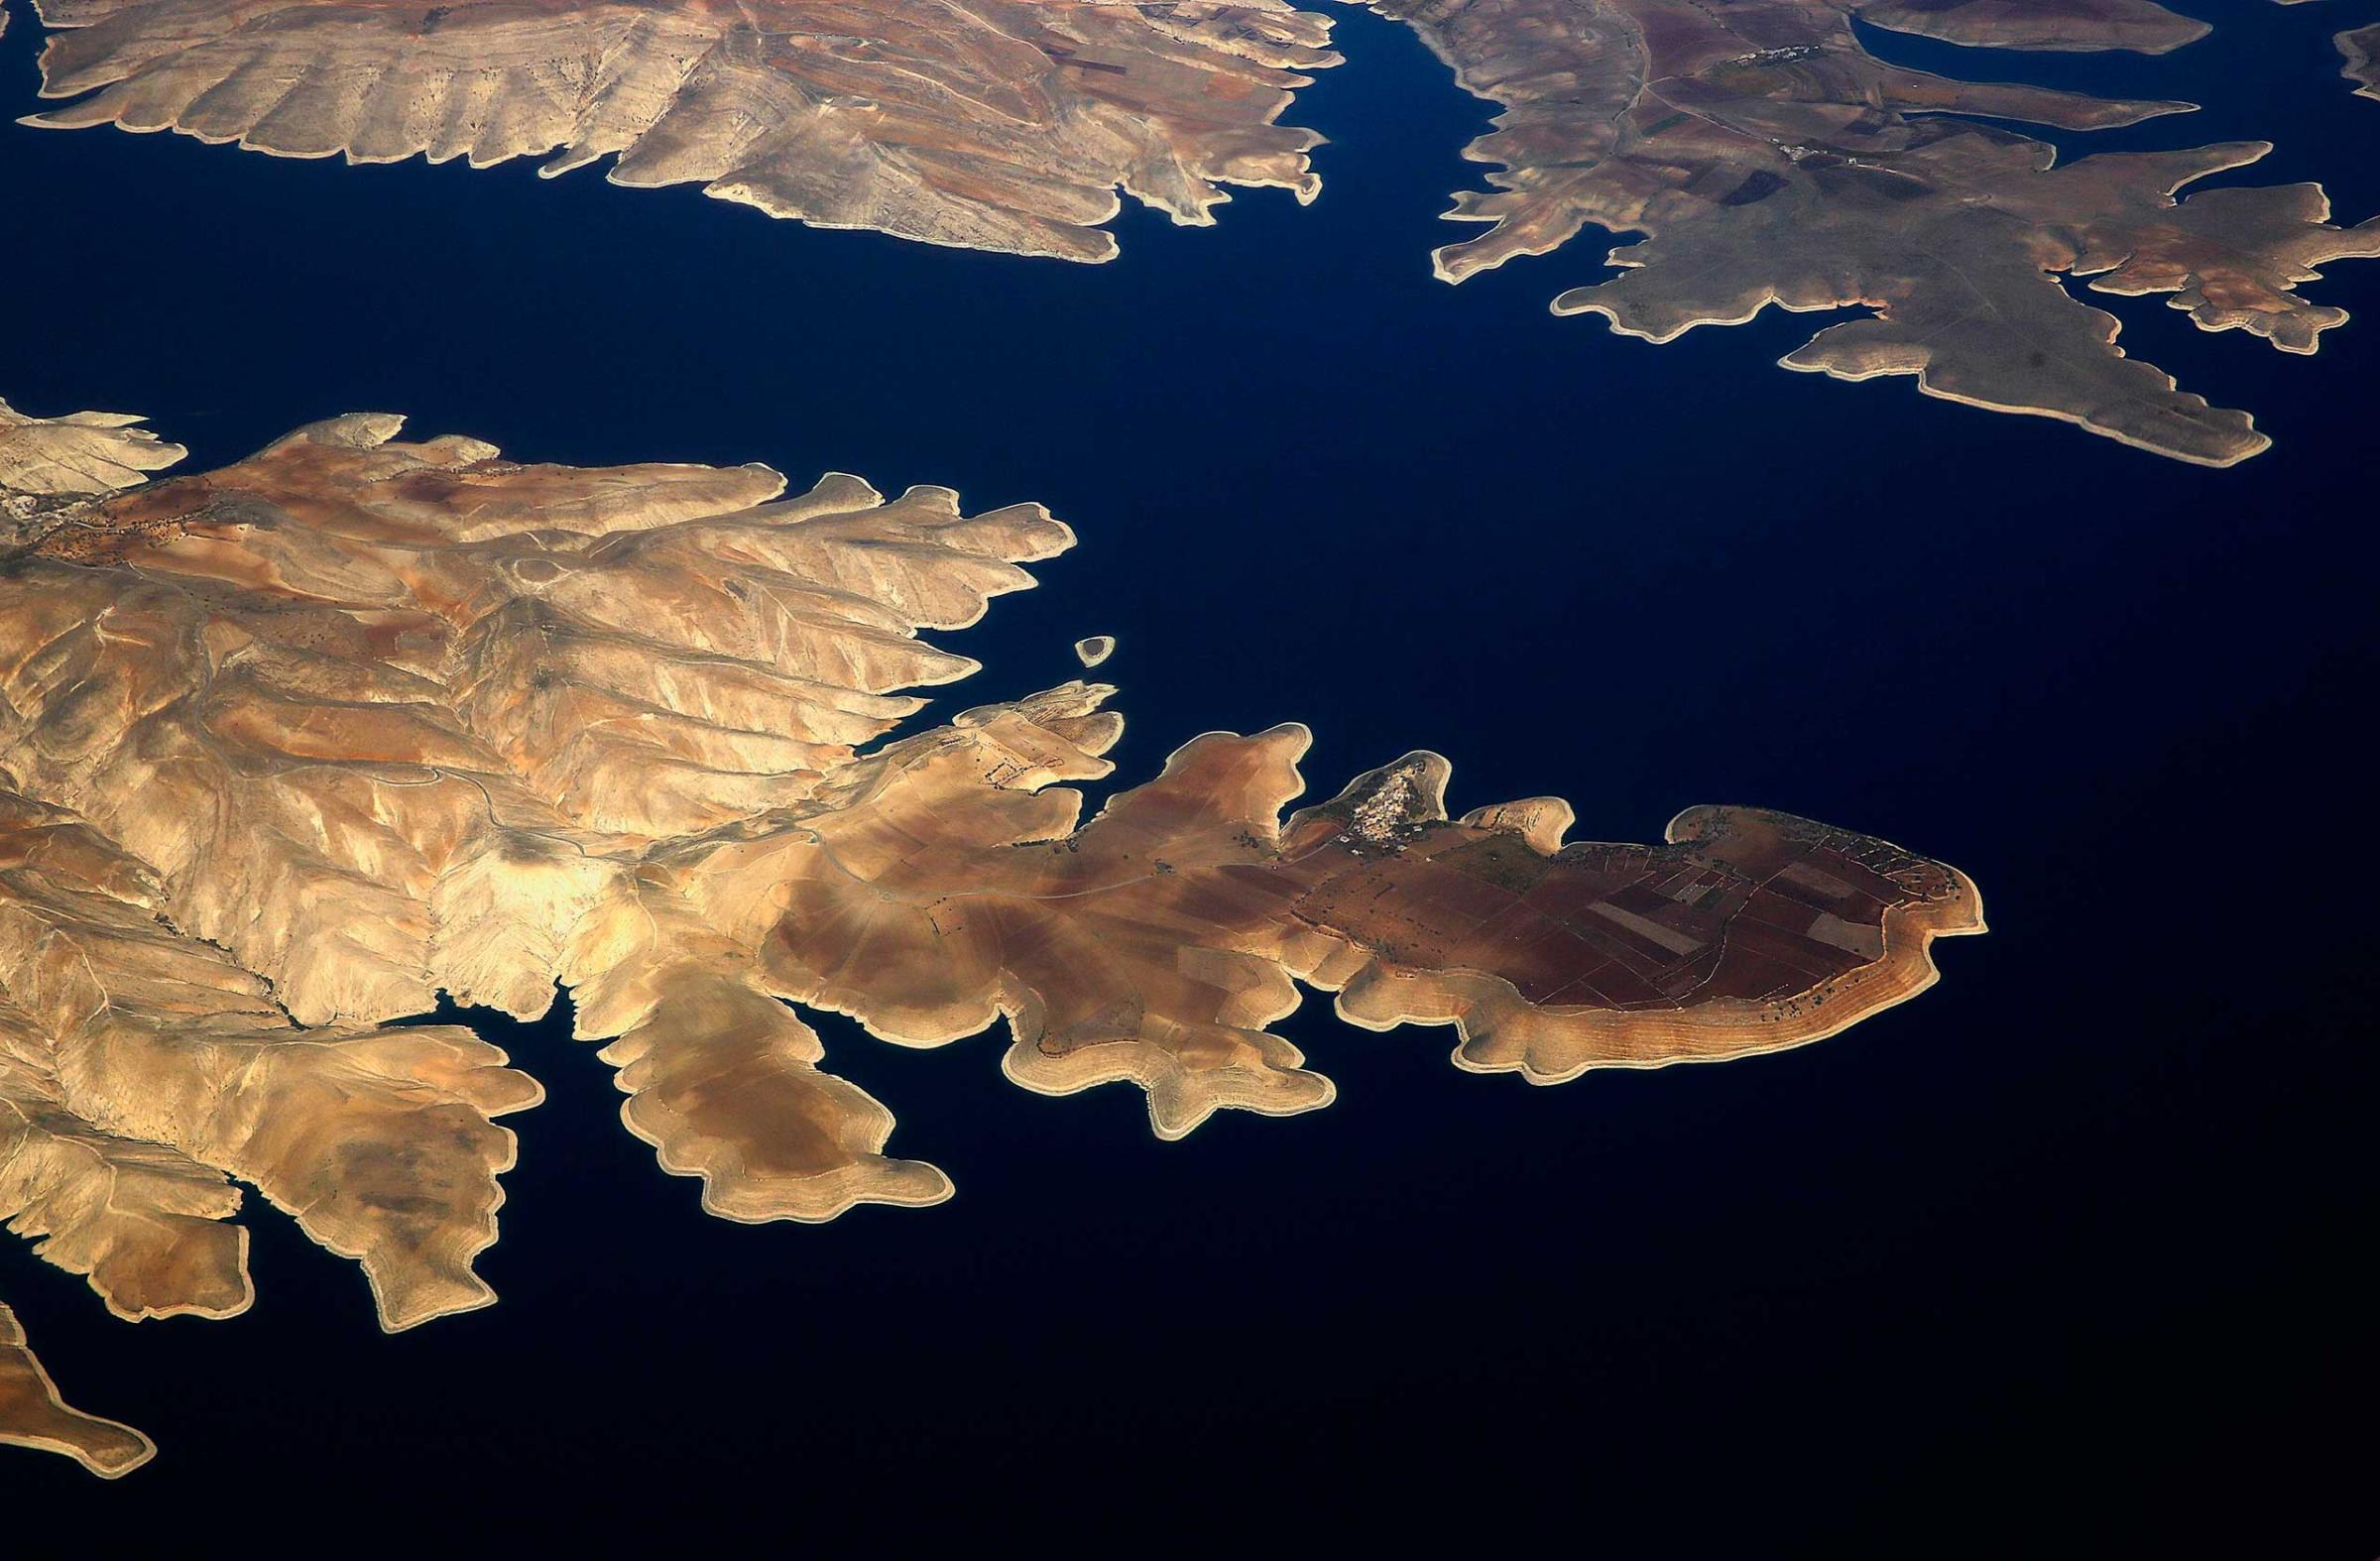 The town of Susuz is seen on the northern shore of the Ataturk dam through the window of a passenger aircraft flying over south-eastern Turkey province of Adiyaman